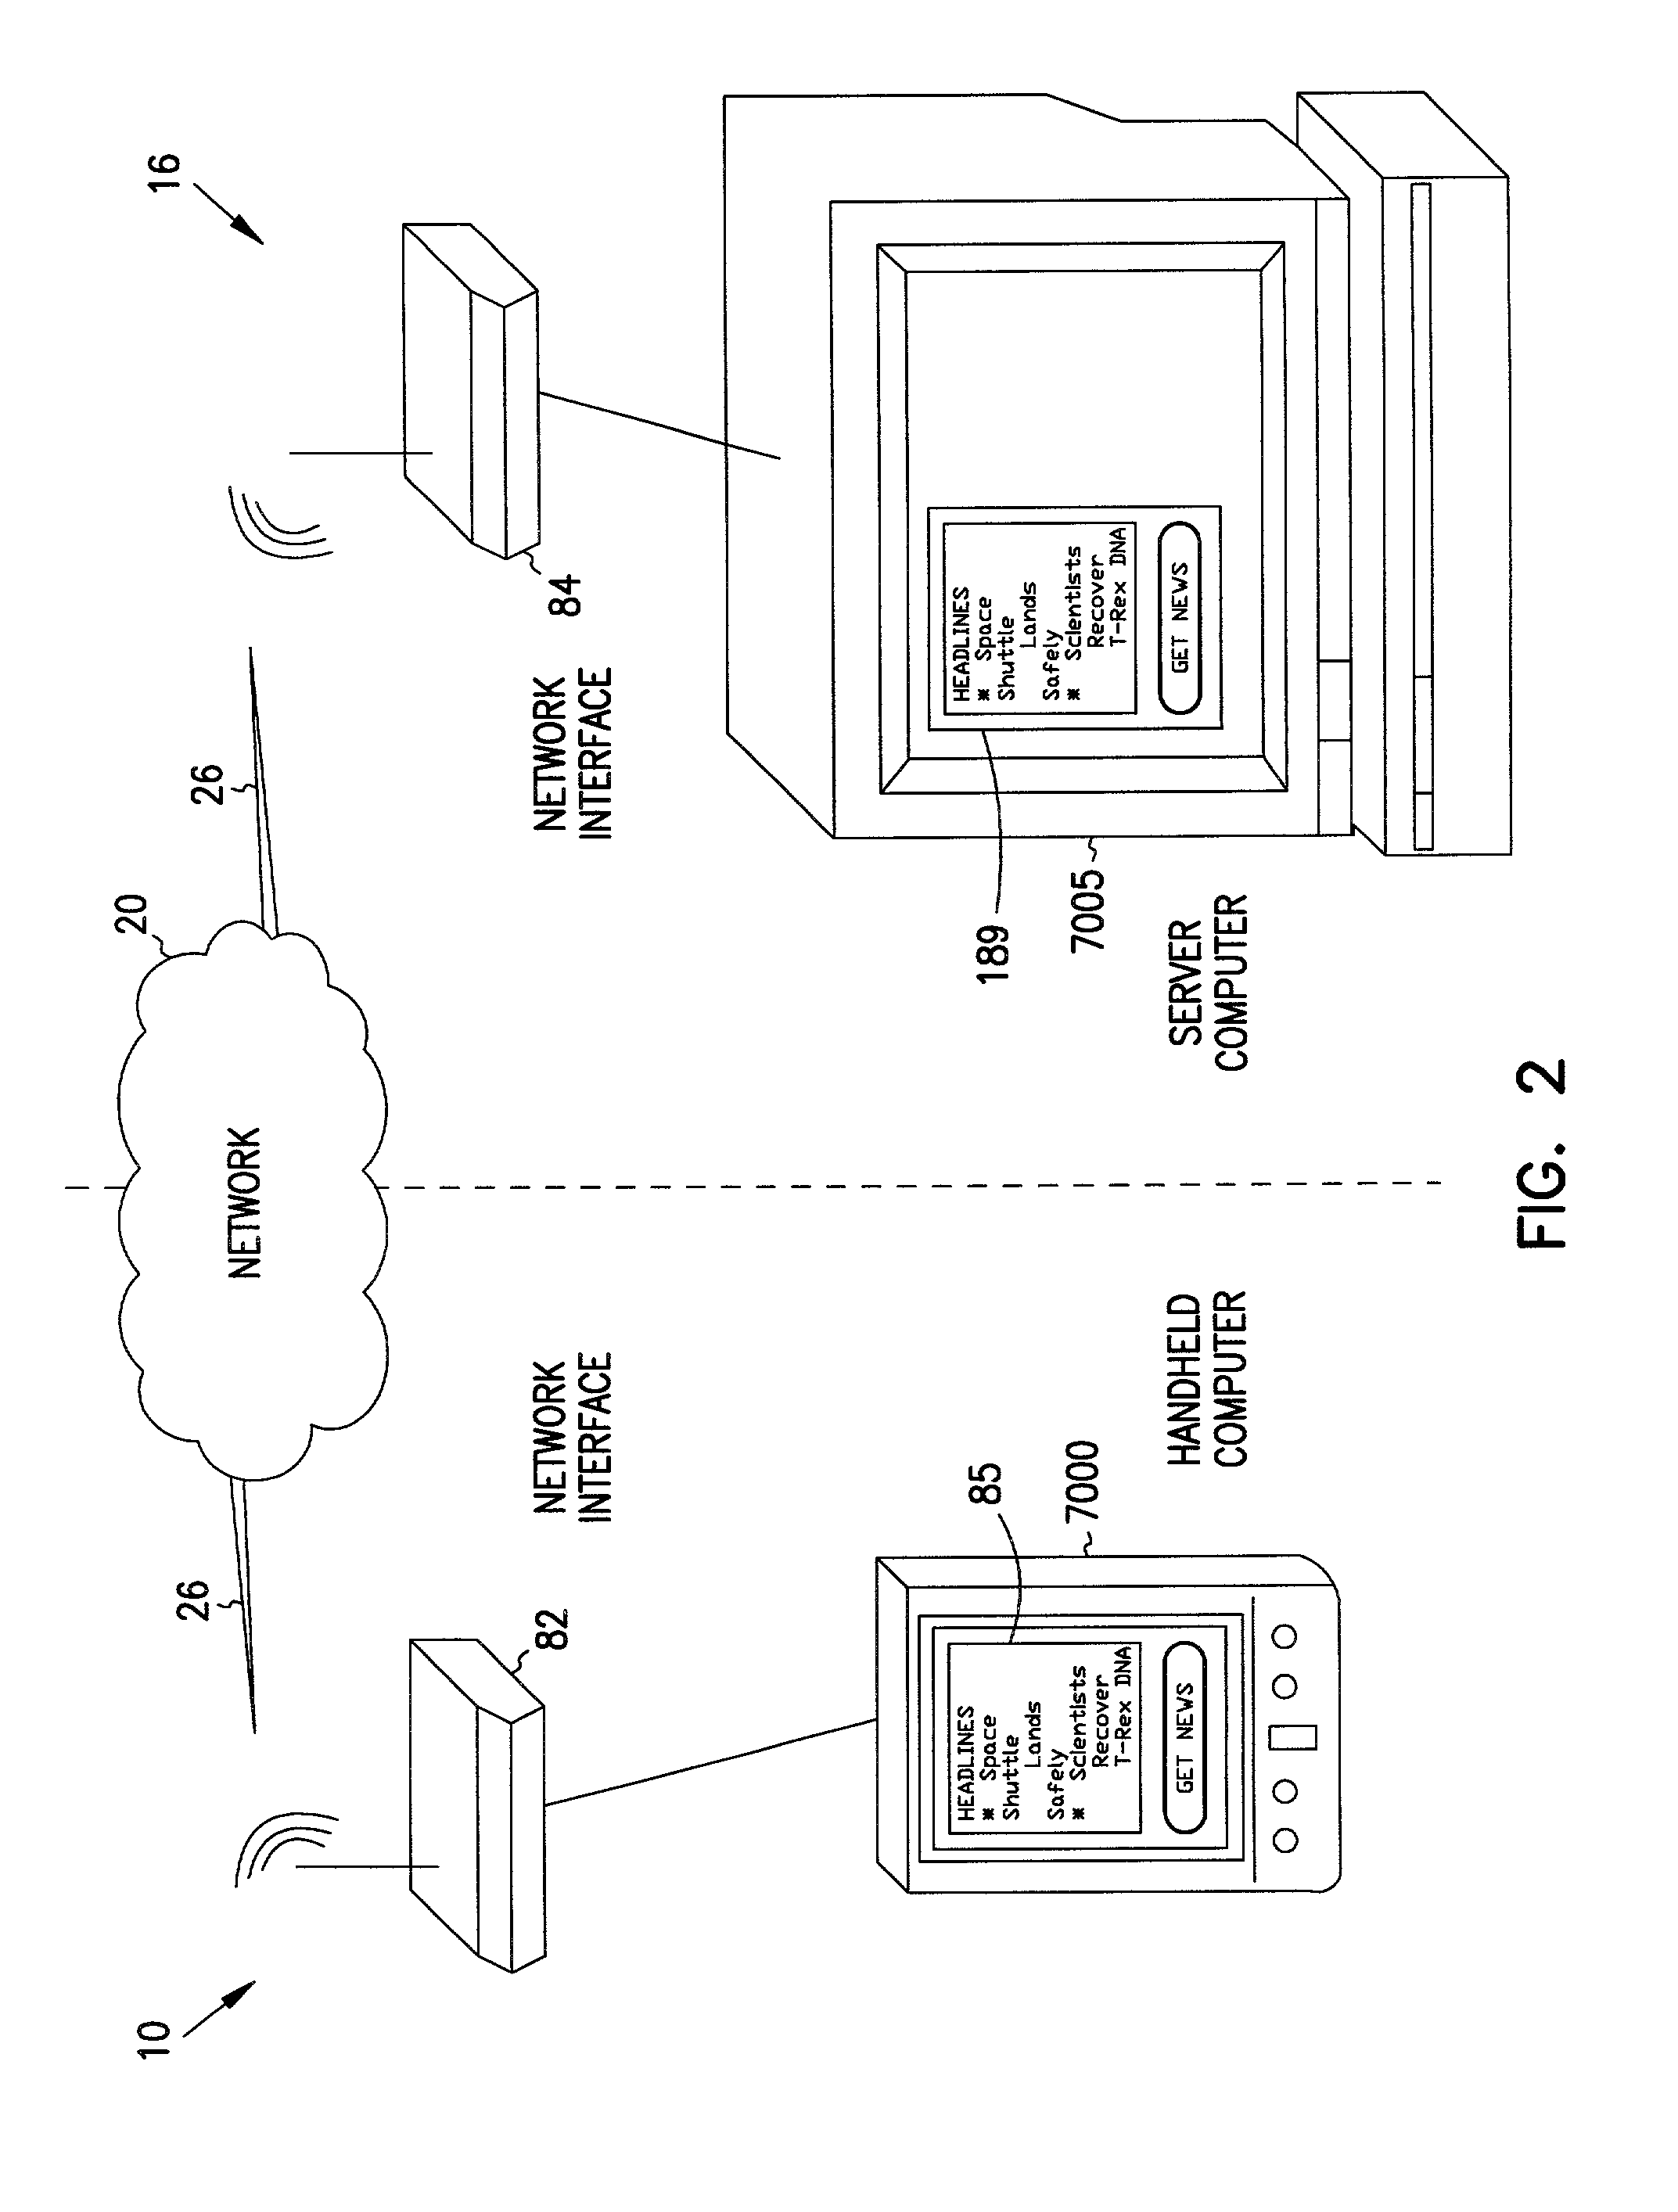 System and method for efficient remote operation of real-time graphical applications